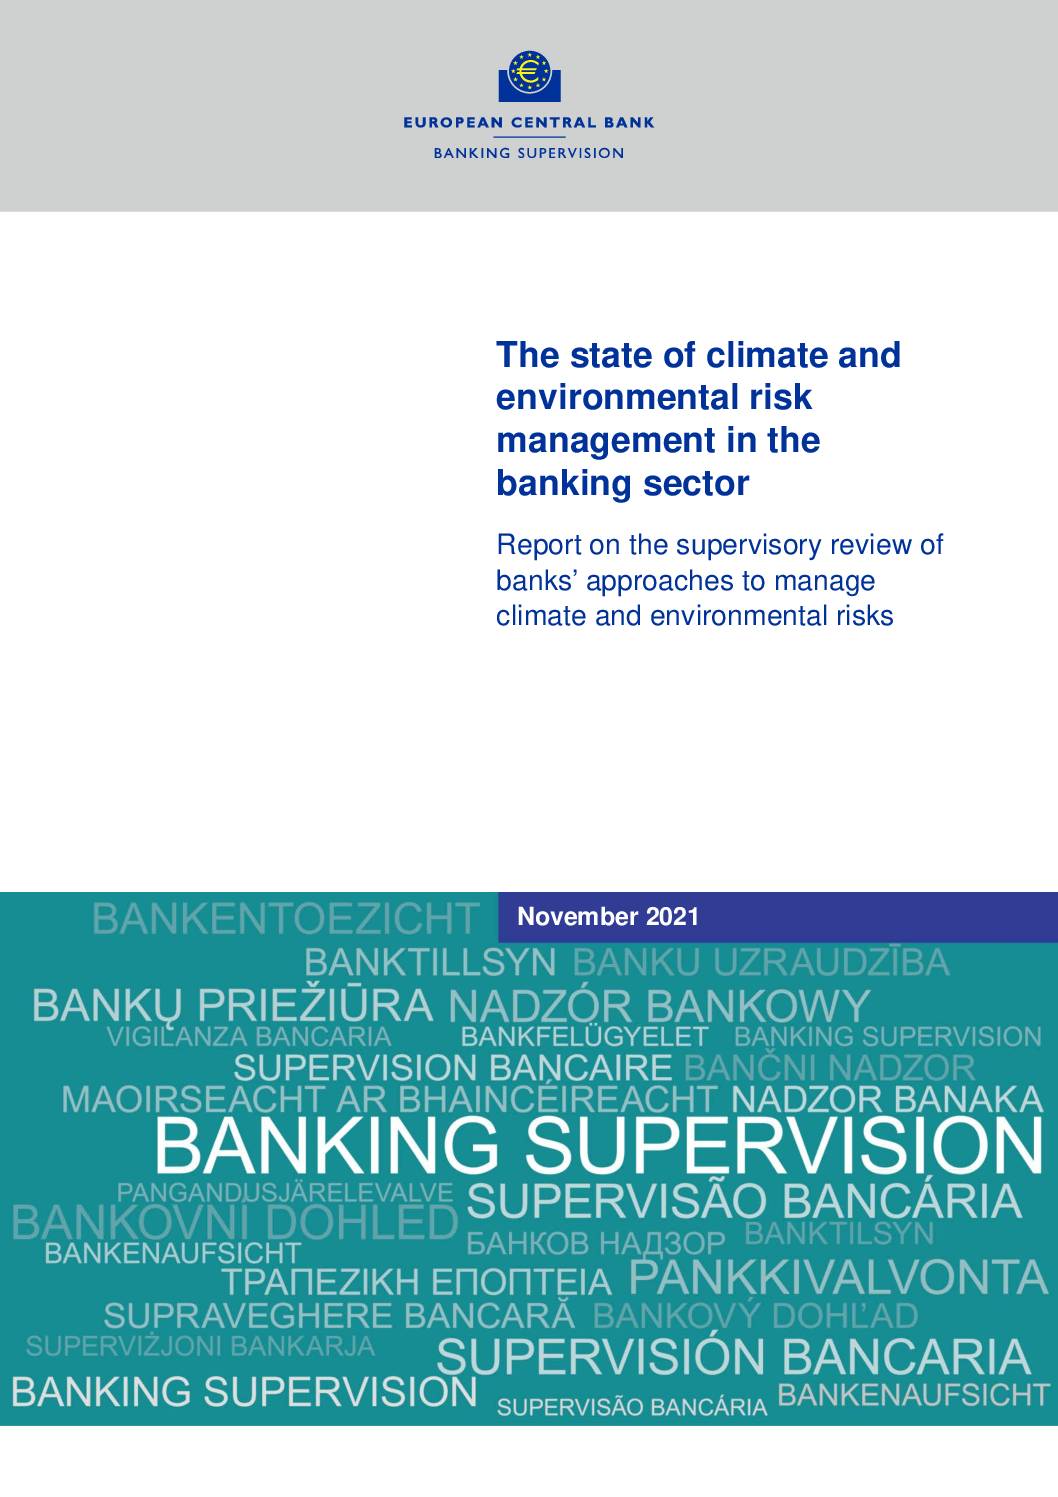 The State of Climate and Environmental Risk Management in the Banking Sector